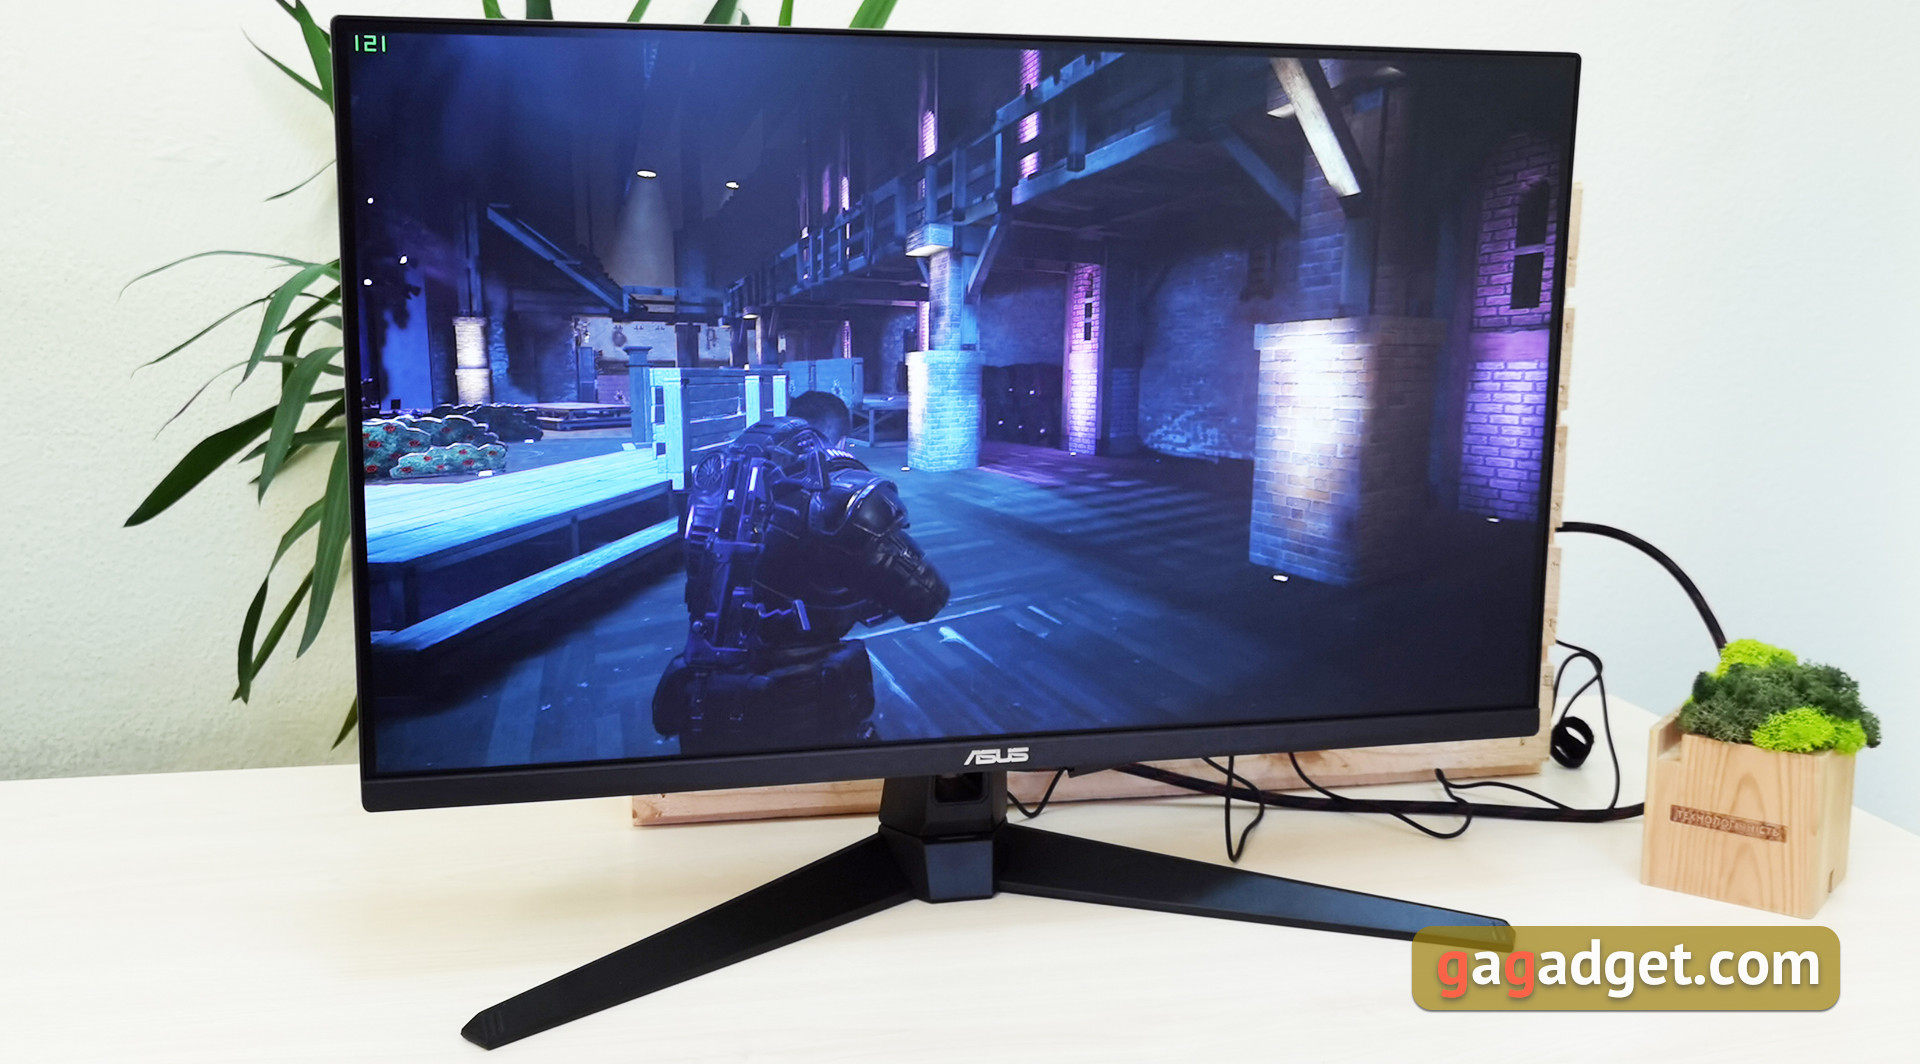 ASUS TUF Gaming VG279Q1A review: 27-inch gaming monitor with IPS panel and  165 Hz refresh rate | Monitore